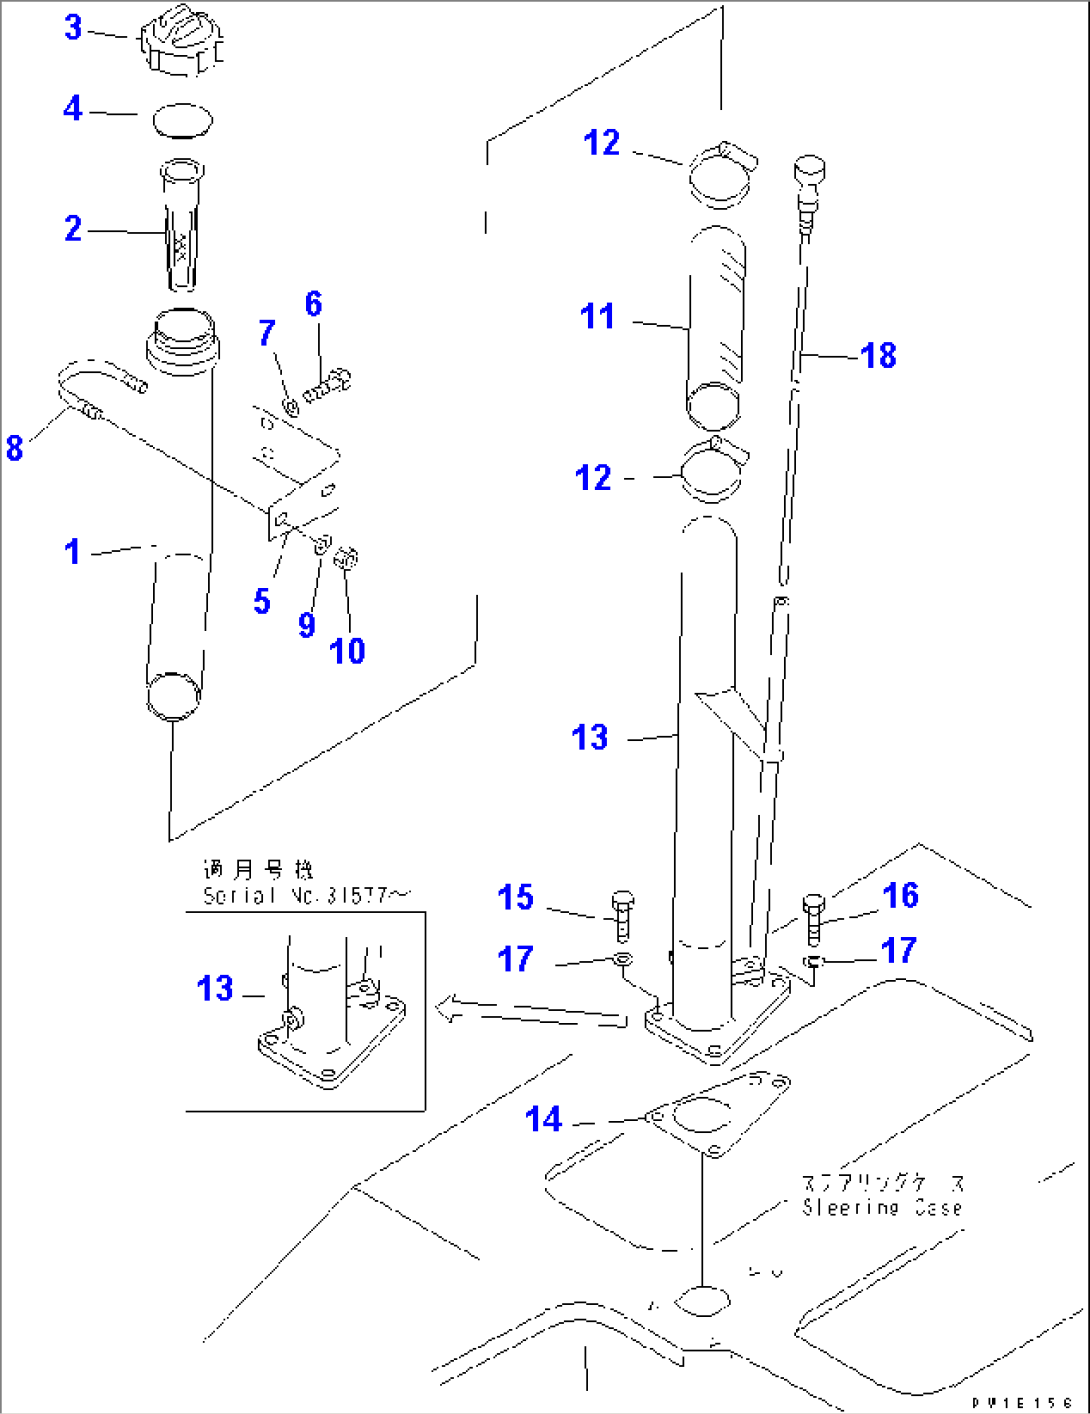 OIL FILLER AND LEVEL GAUGE (WITH SAFETY DEVICE)